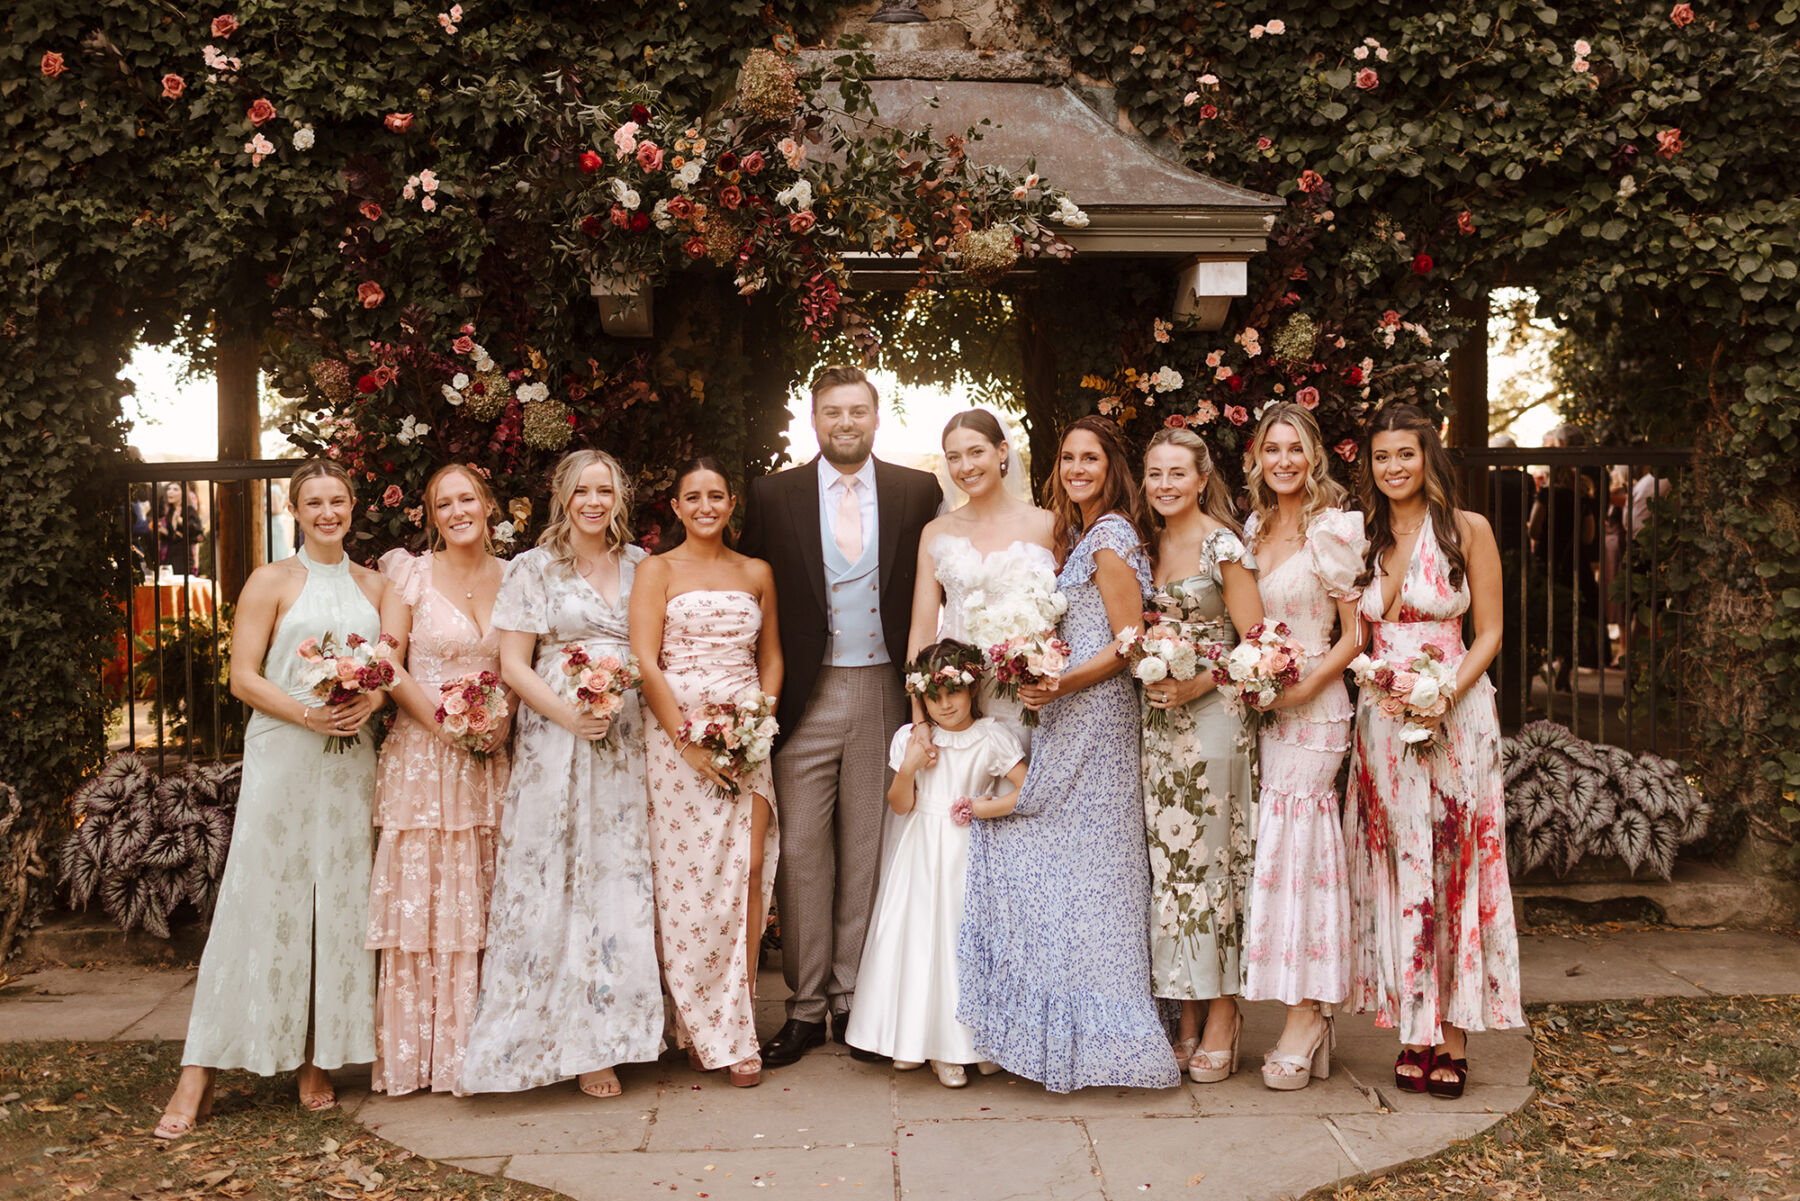 Bride and groom standing with bridesmaids in pretty pastel mismatched dresses.